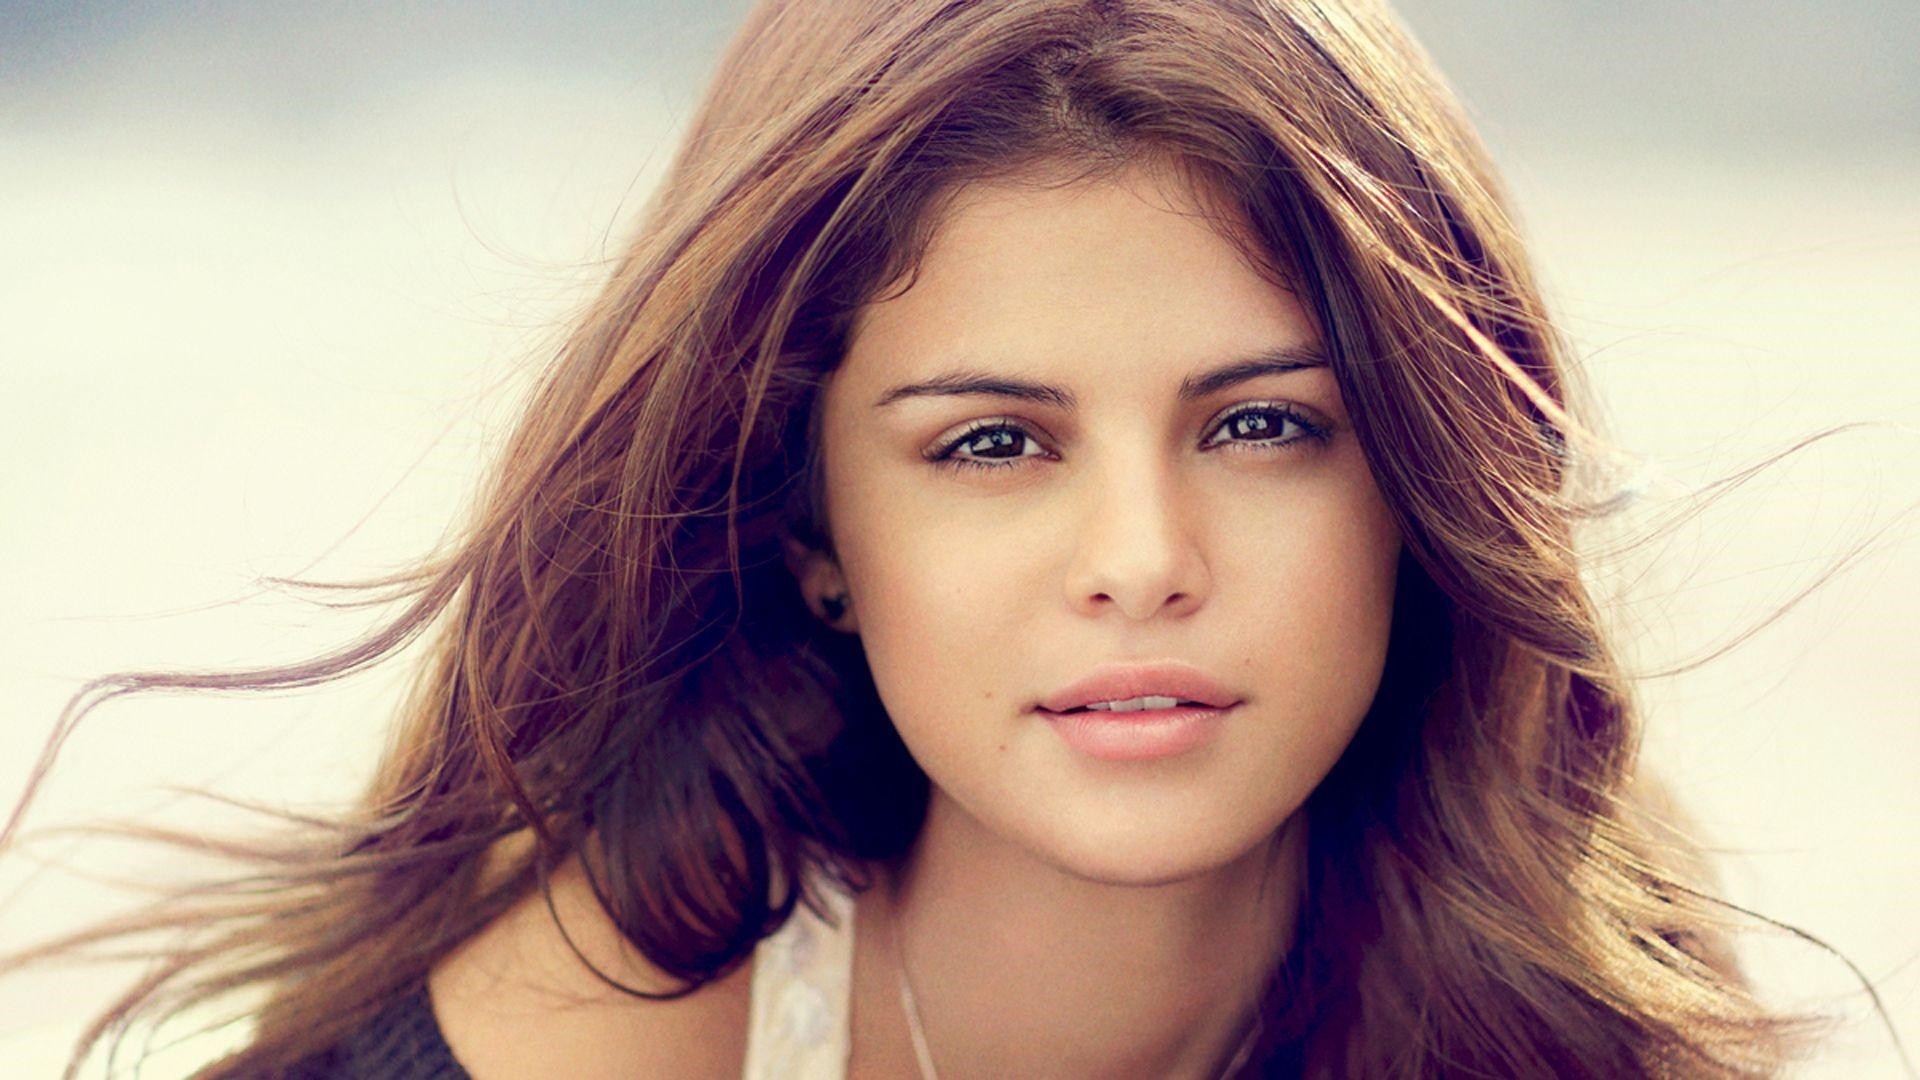 Selena Gomez HD Wallpapers | Latest Selena Gomez Wallpapers HD Free  Download (1080p to 2K) - FilmiBeat